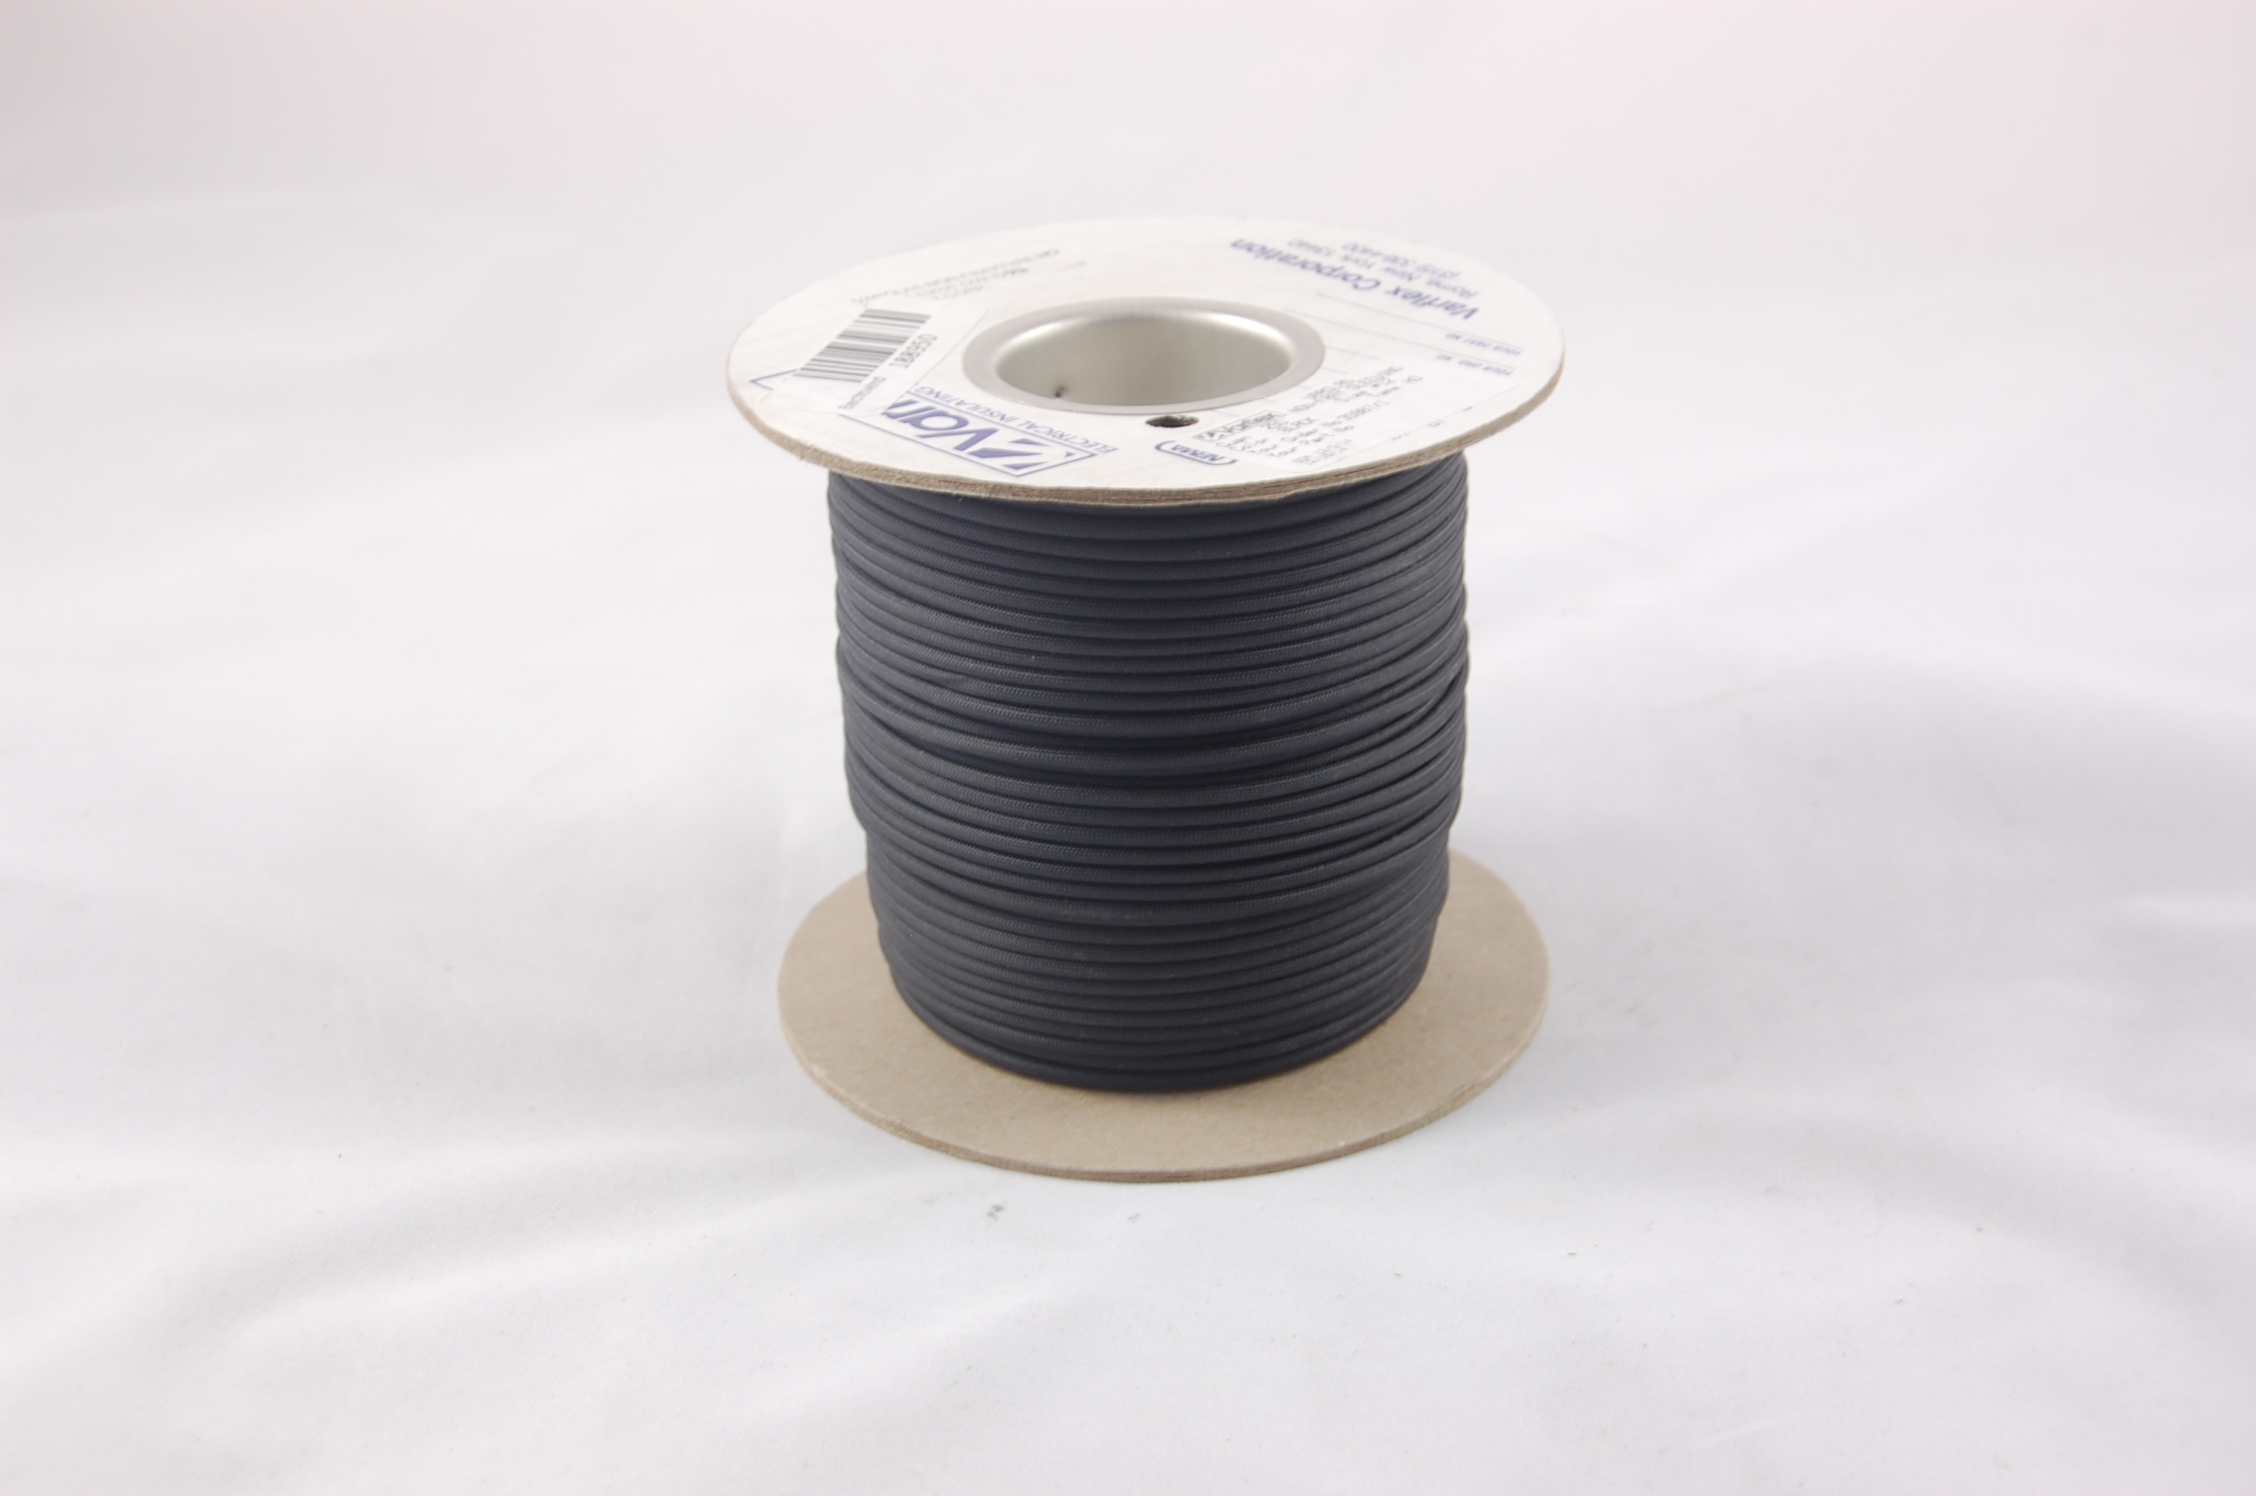 #2 AWG Varglas Type HO Heat-Cleaned and Treated High Temperature Non-Fray Flexible Fiberglass Sleeving , black, 250 FT per spool